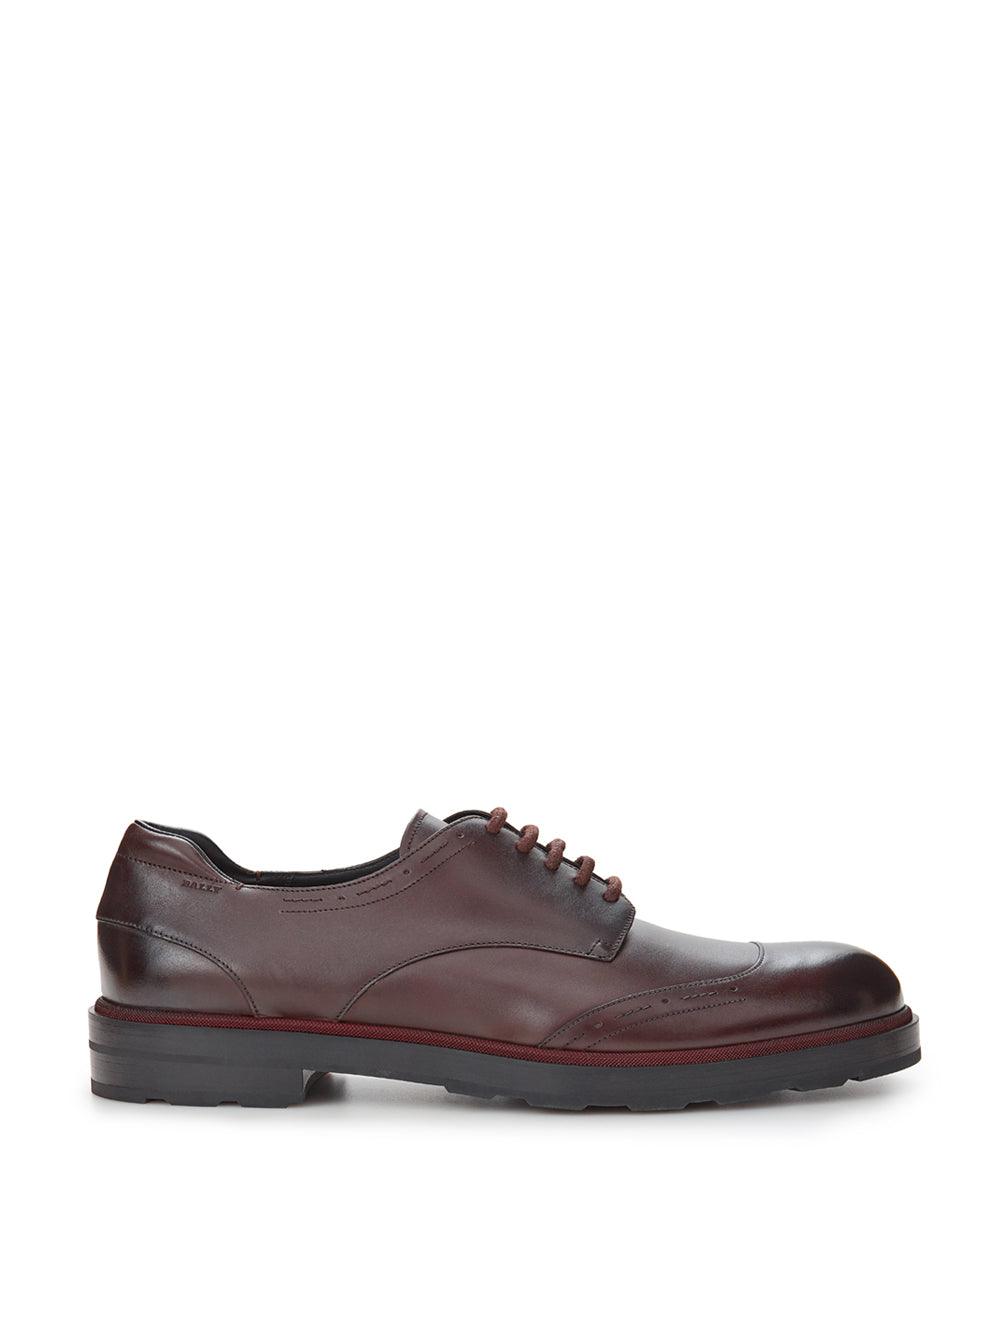 Bally Brown Leather Colery Derby - Ellie Belle